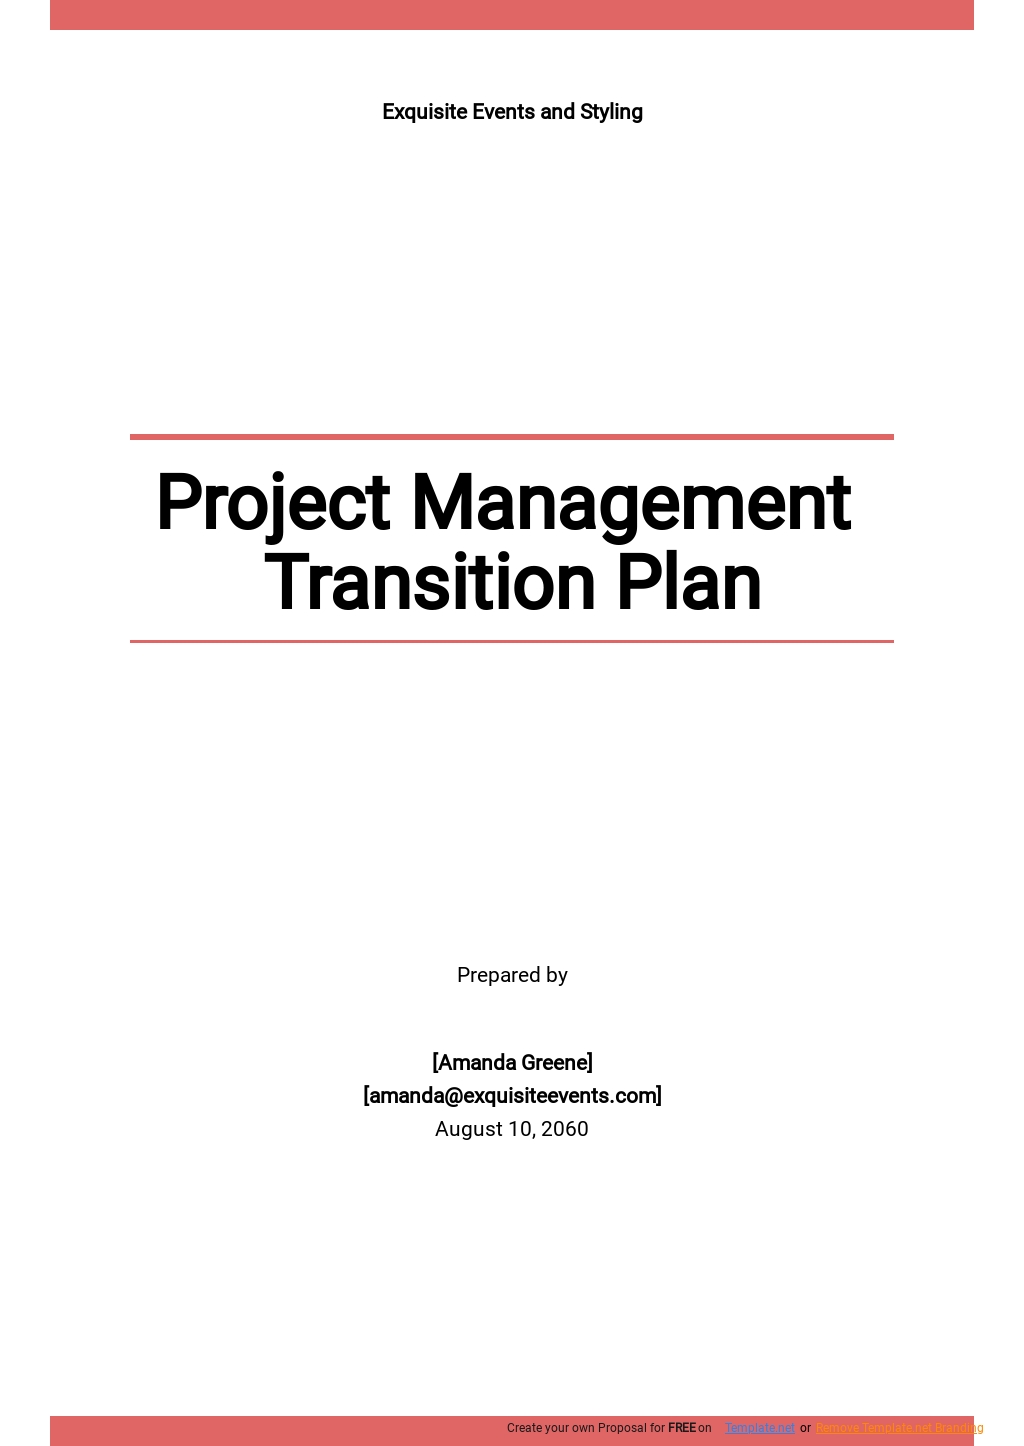 Project Management Transition Plan Template .jpe